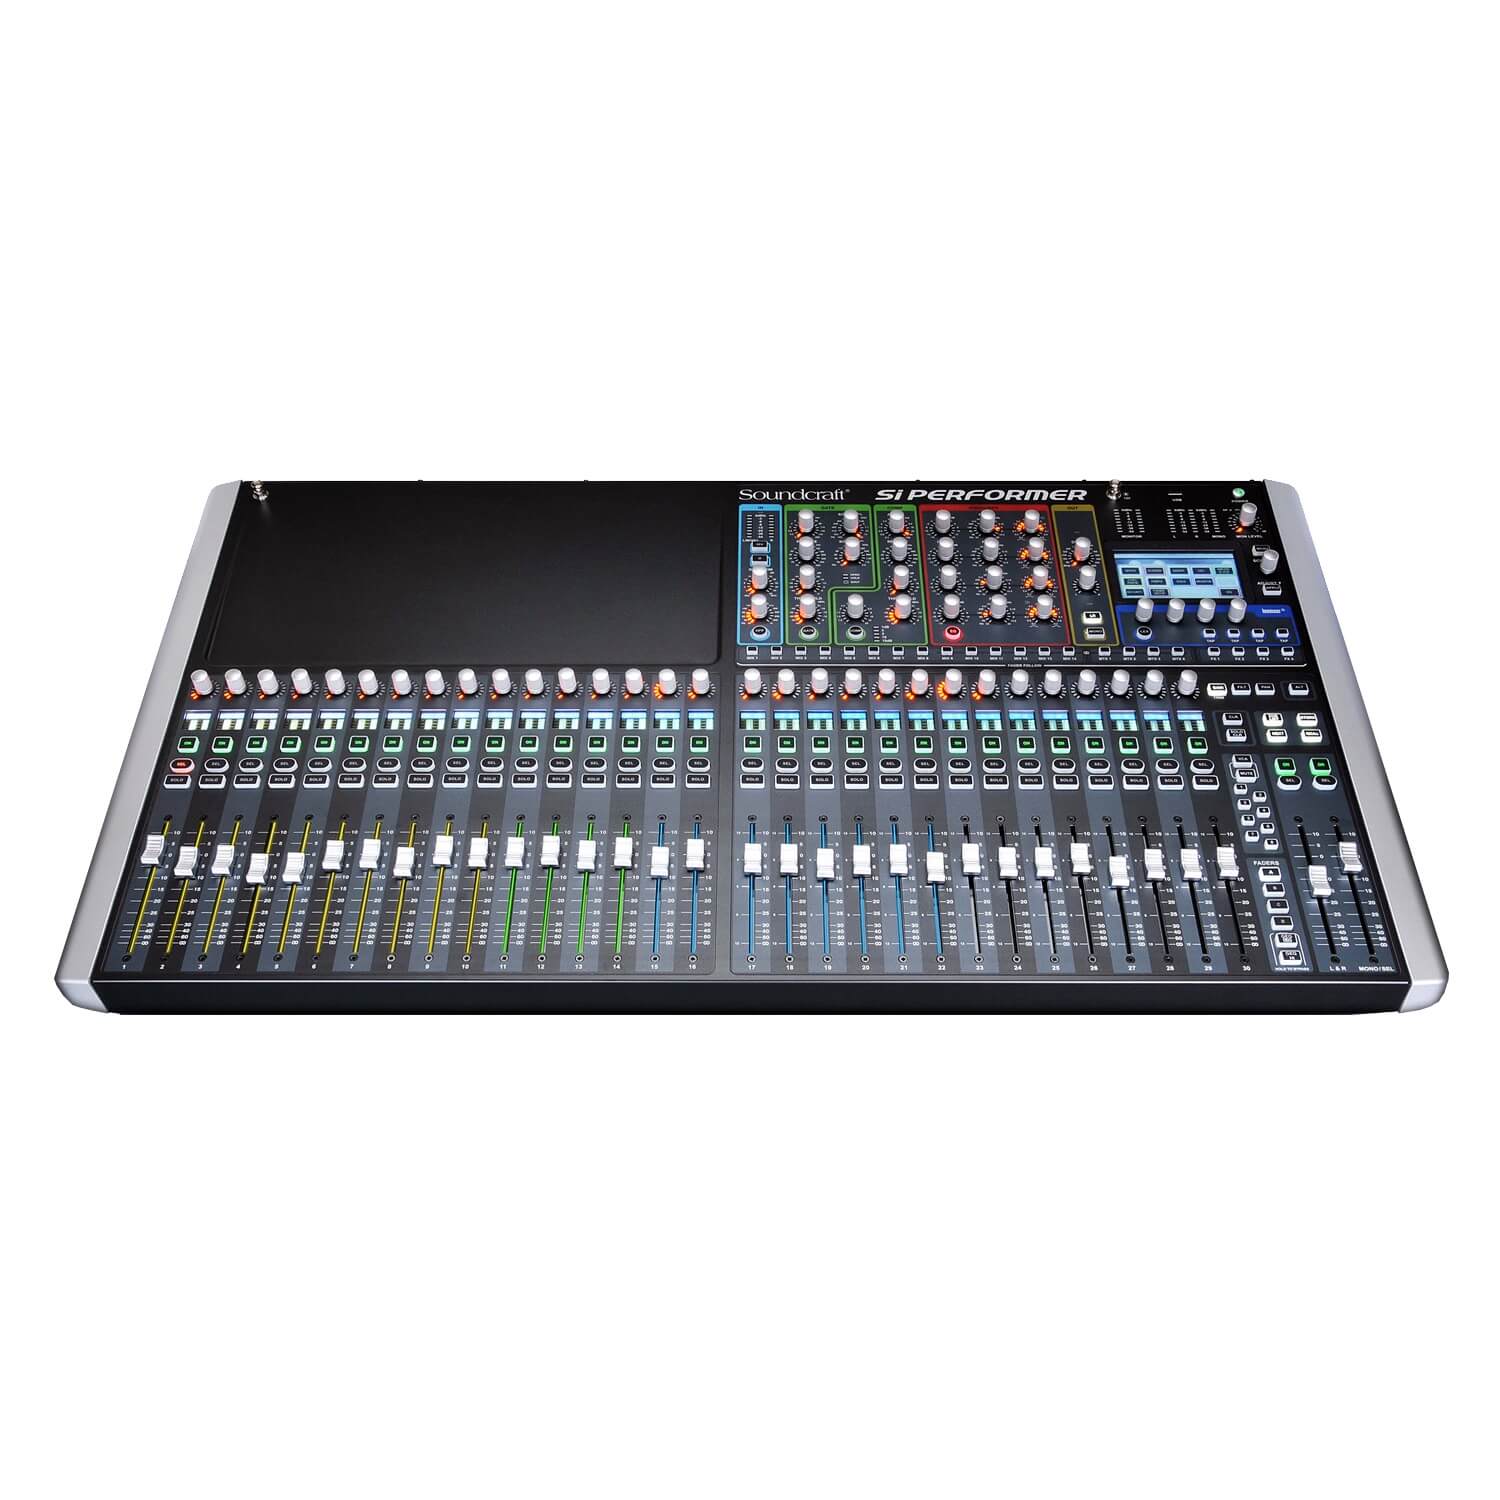 Soundcraft Si Performer 3 - 80-channel Digital Mixer with DMX Control, front